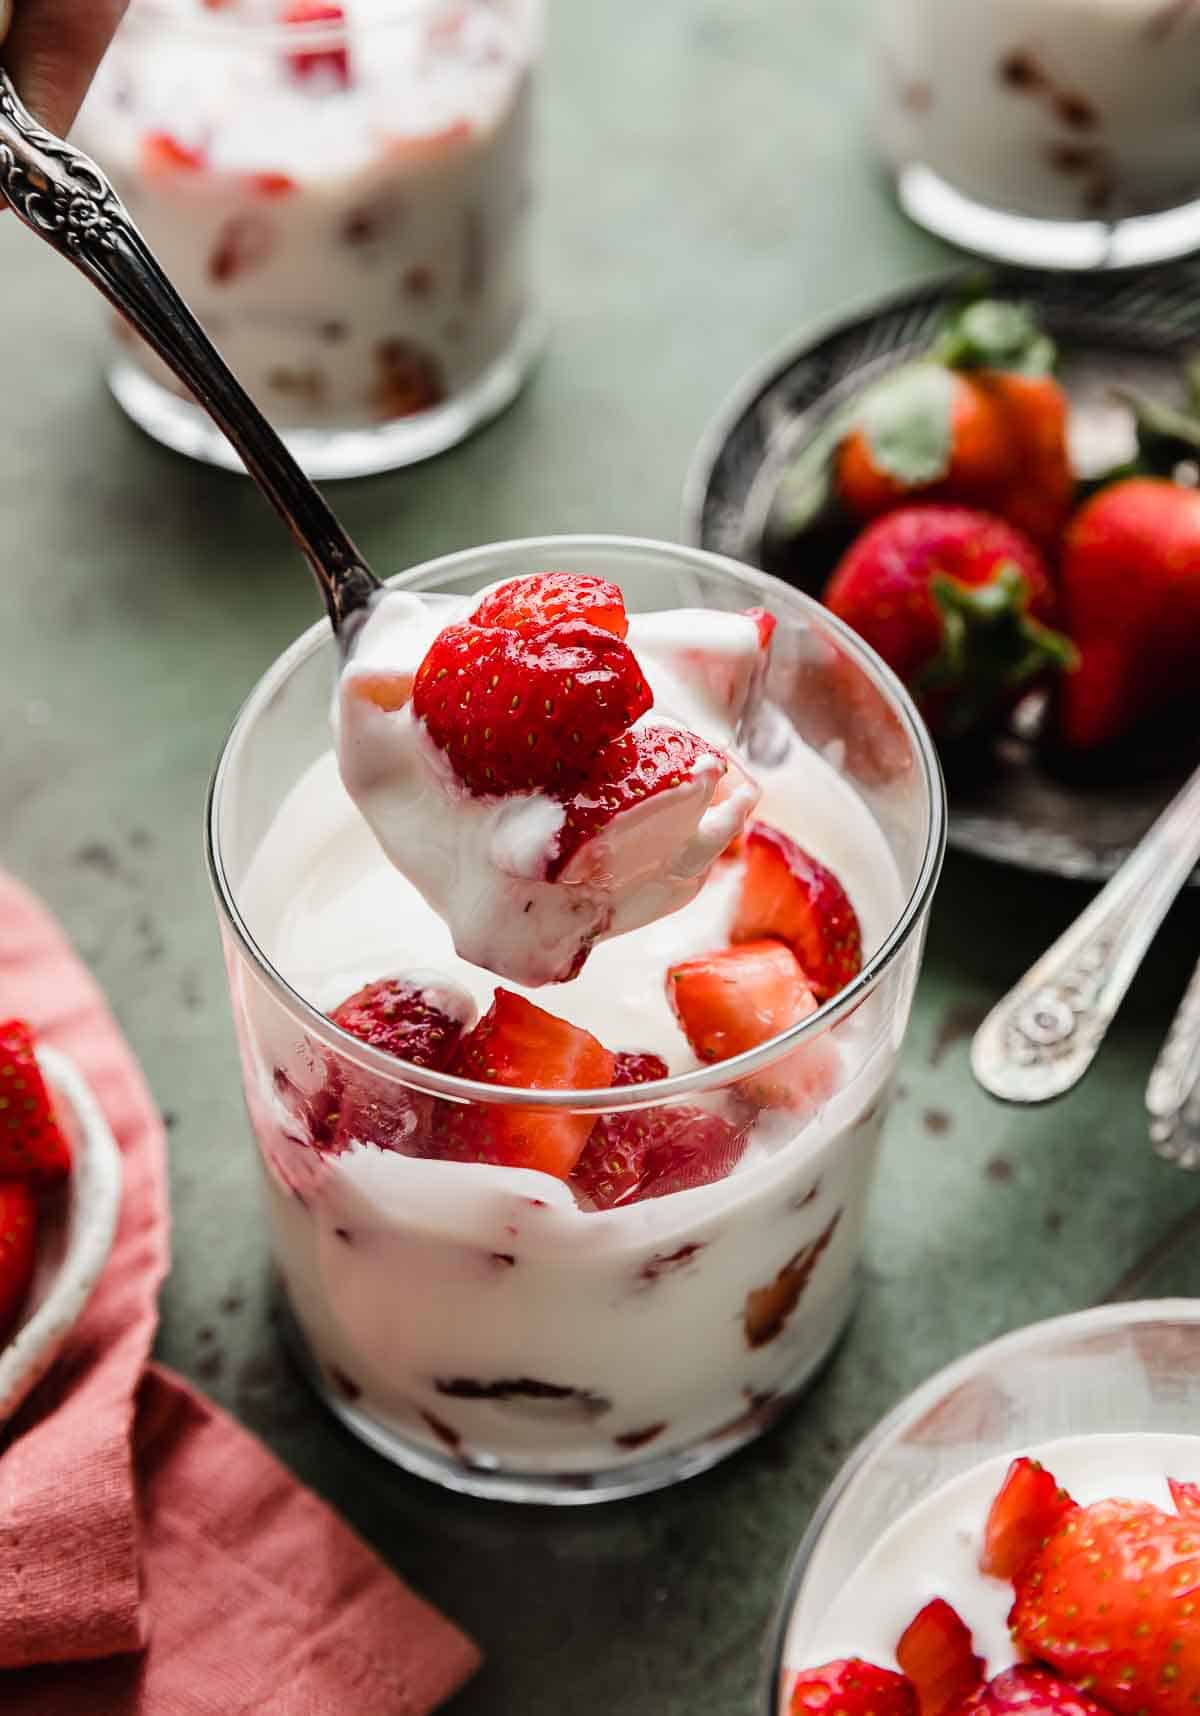 A spoon scooping up Strawberries and Cream (Fresas con Crema) from a glass cup.